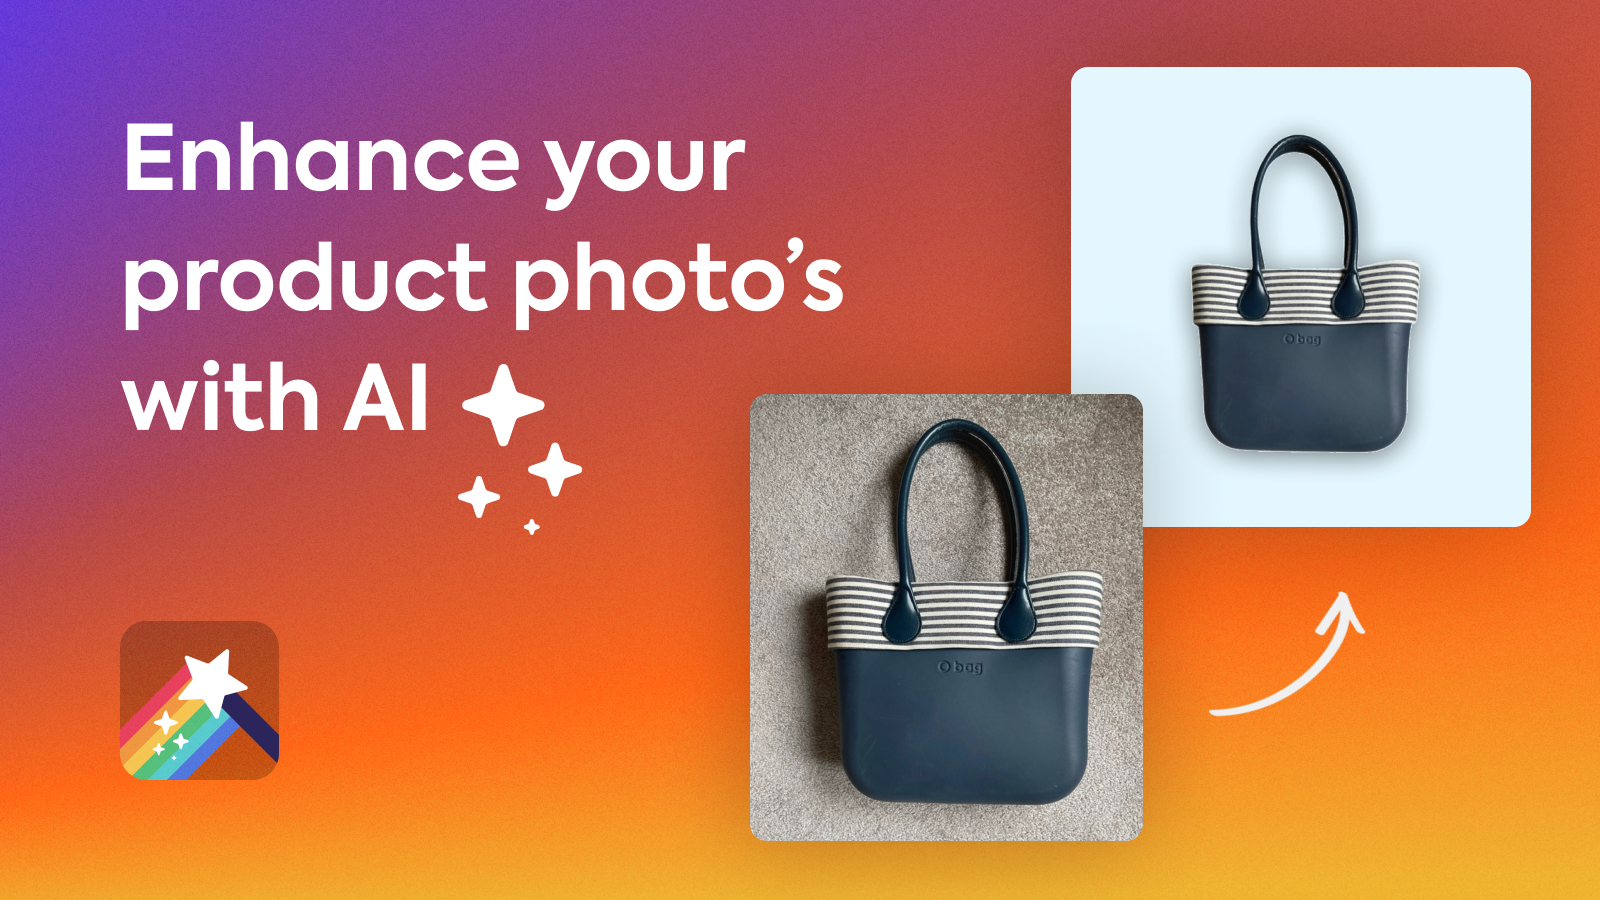 Enhance your product photo's